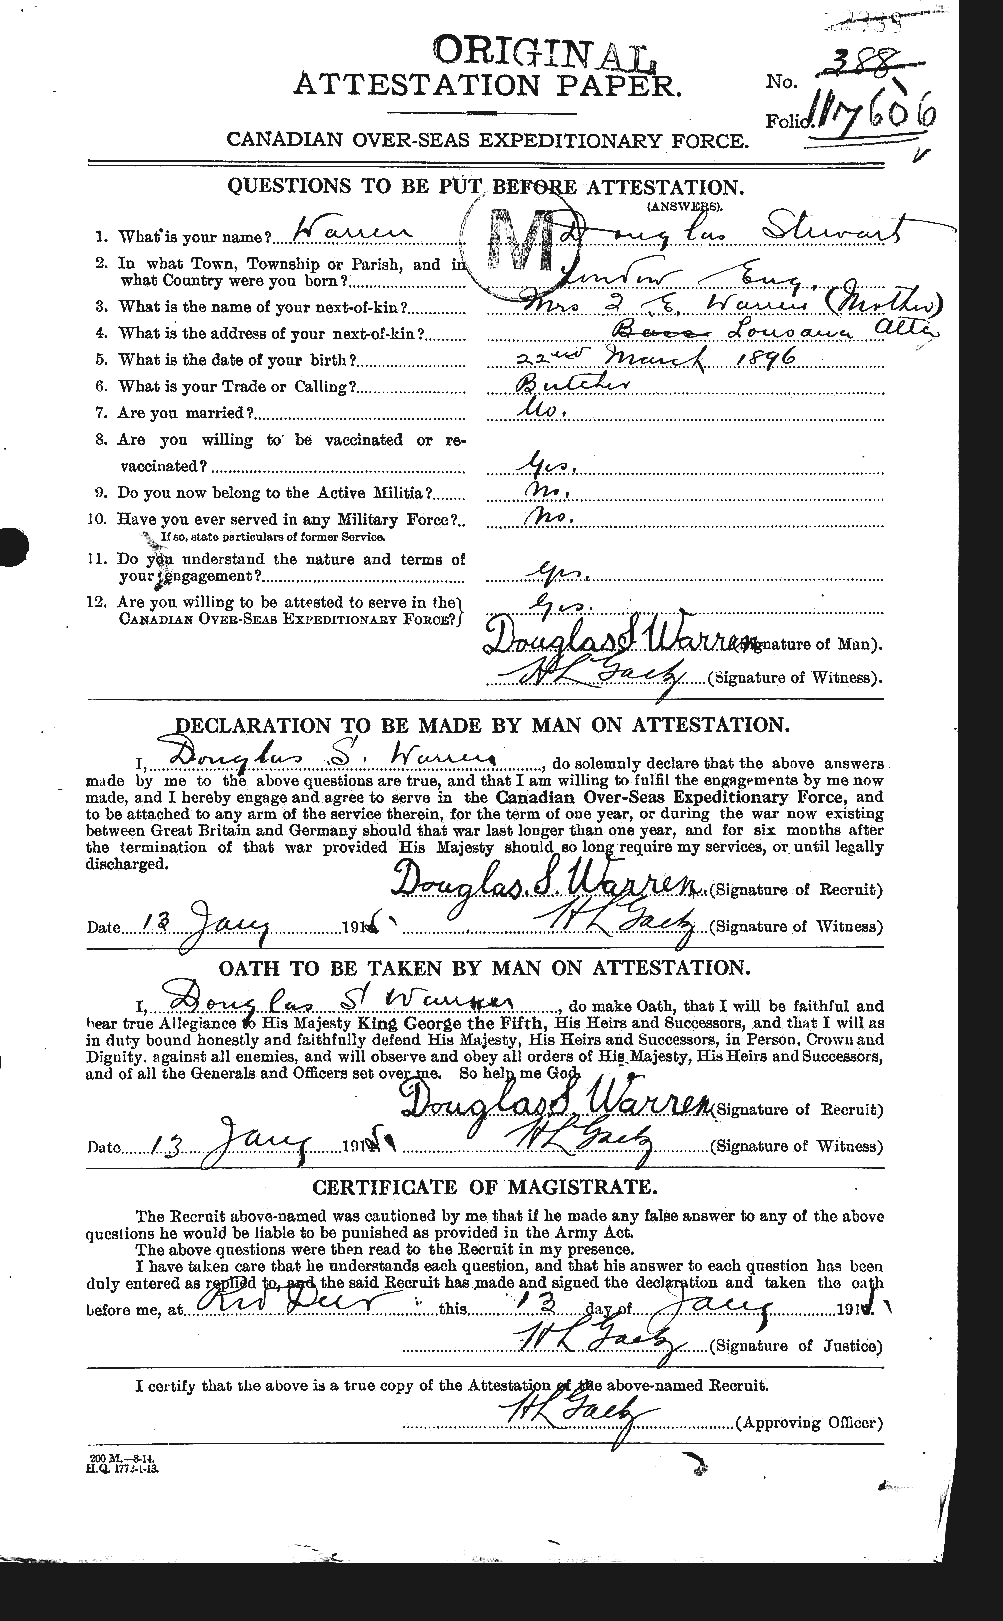 Personnel Records of the First World War - CEF 658410a